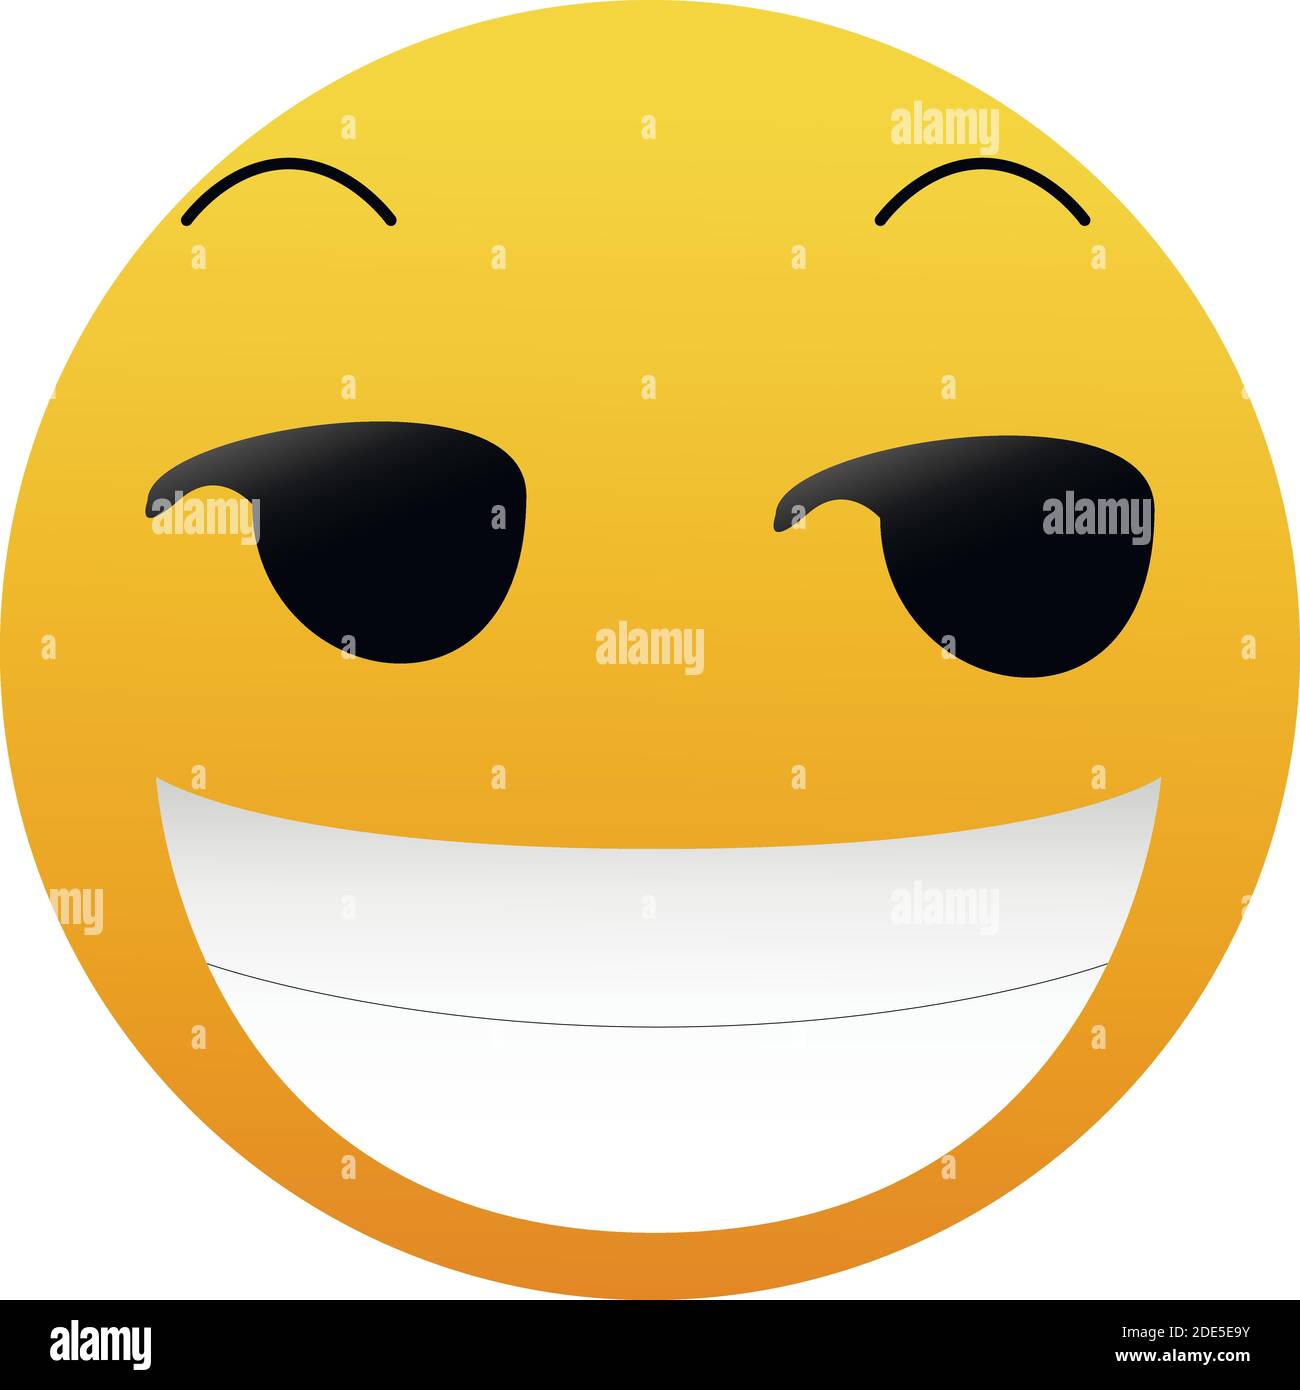 Smirking Emoji. A yellow face with a sly, smug, mischievous, or suggestive facial expression. A half-smile raised eyebrows, and eyes looking to the si Stock Vector